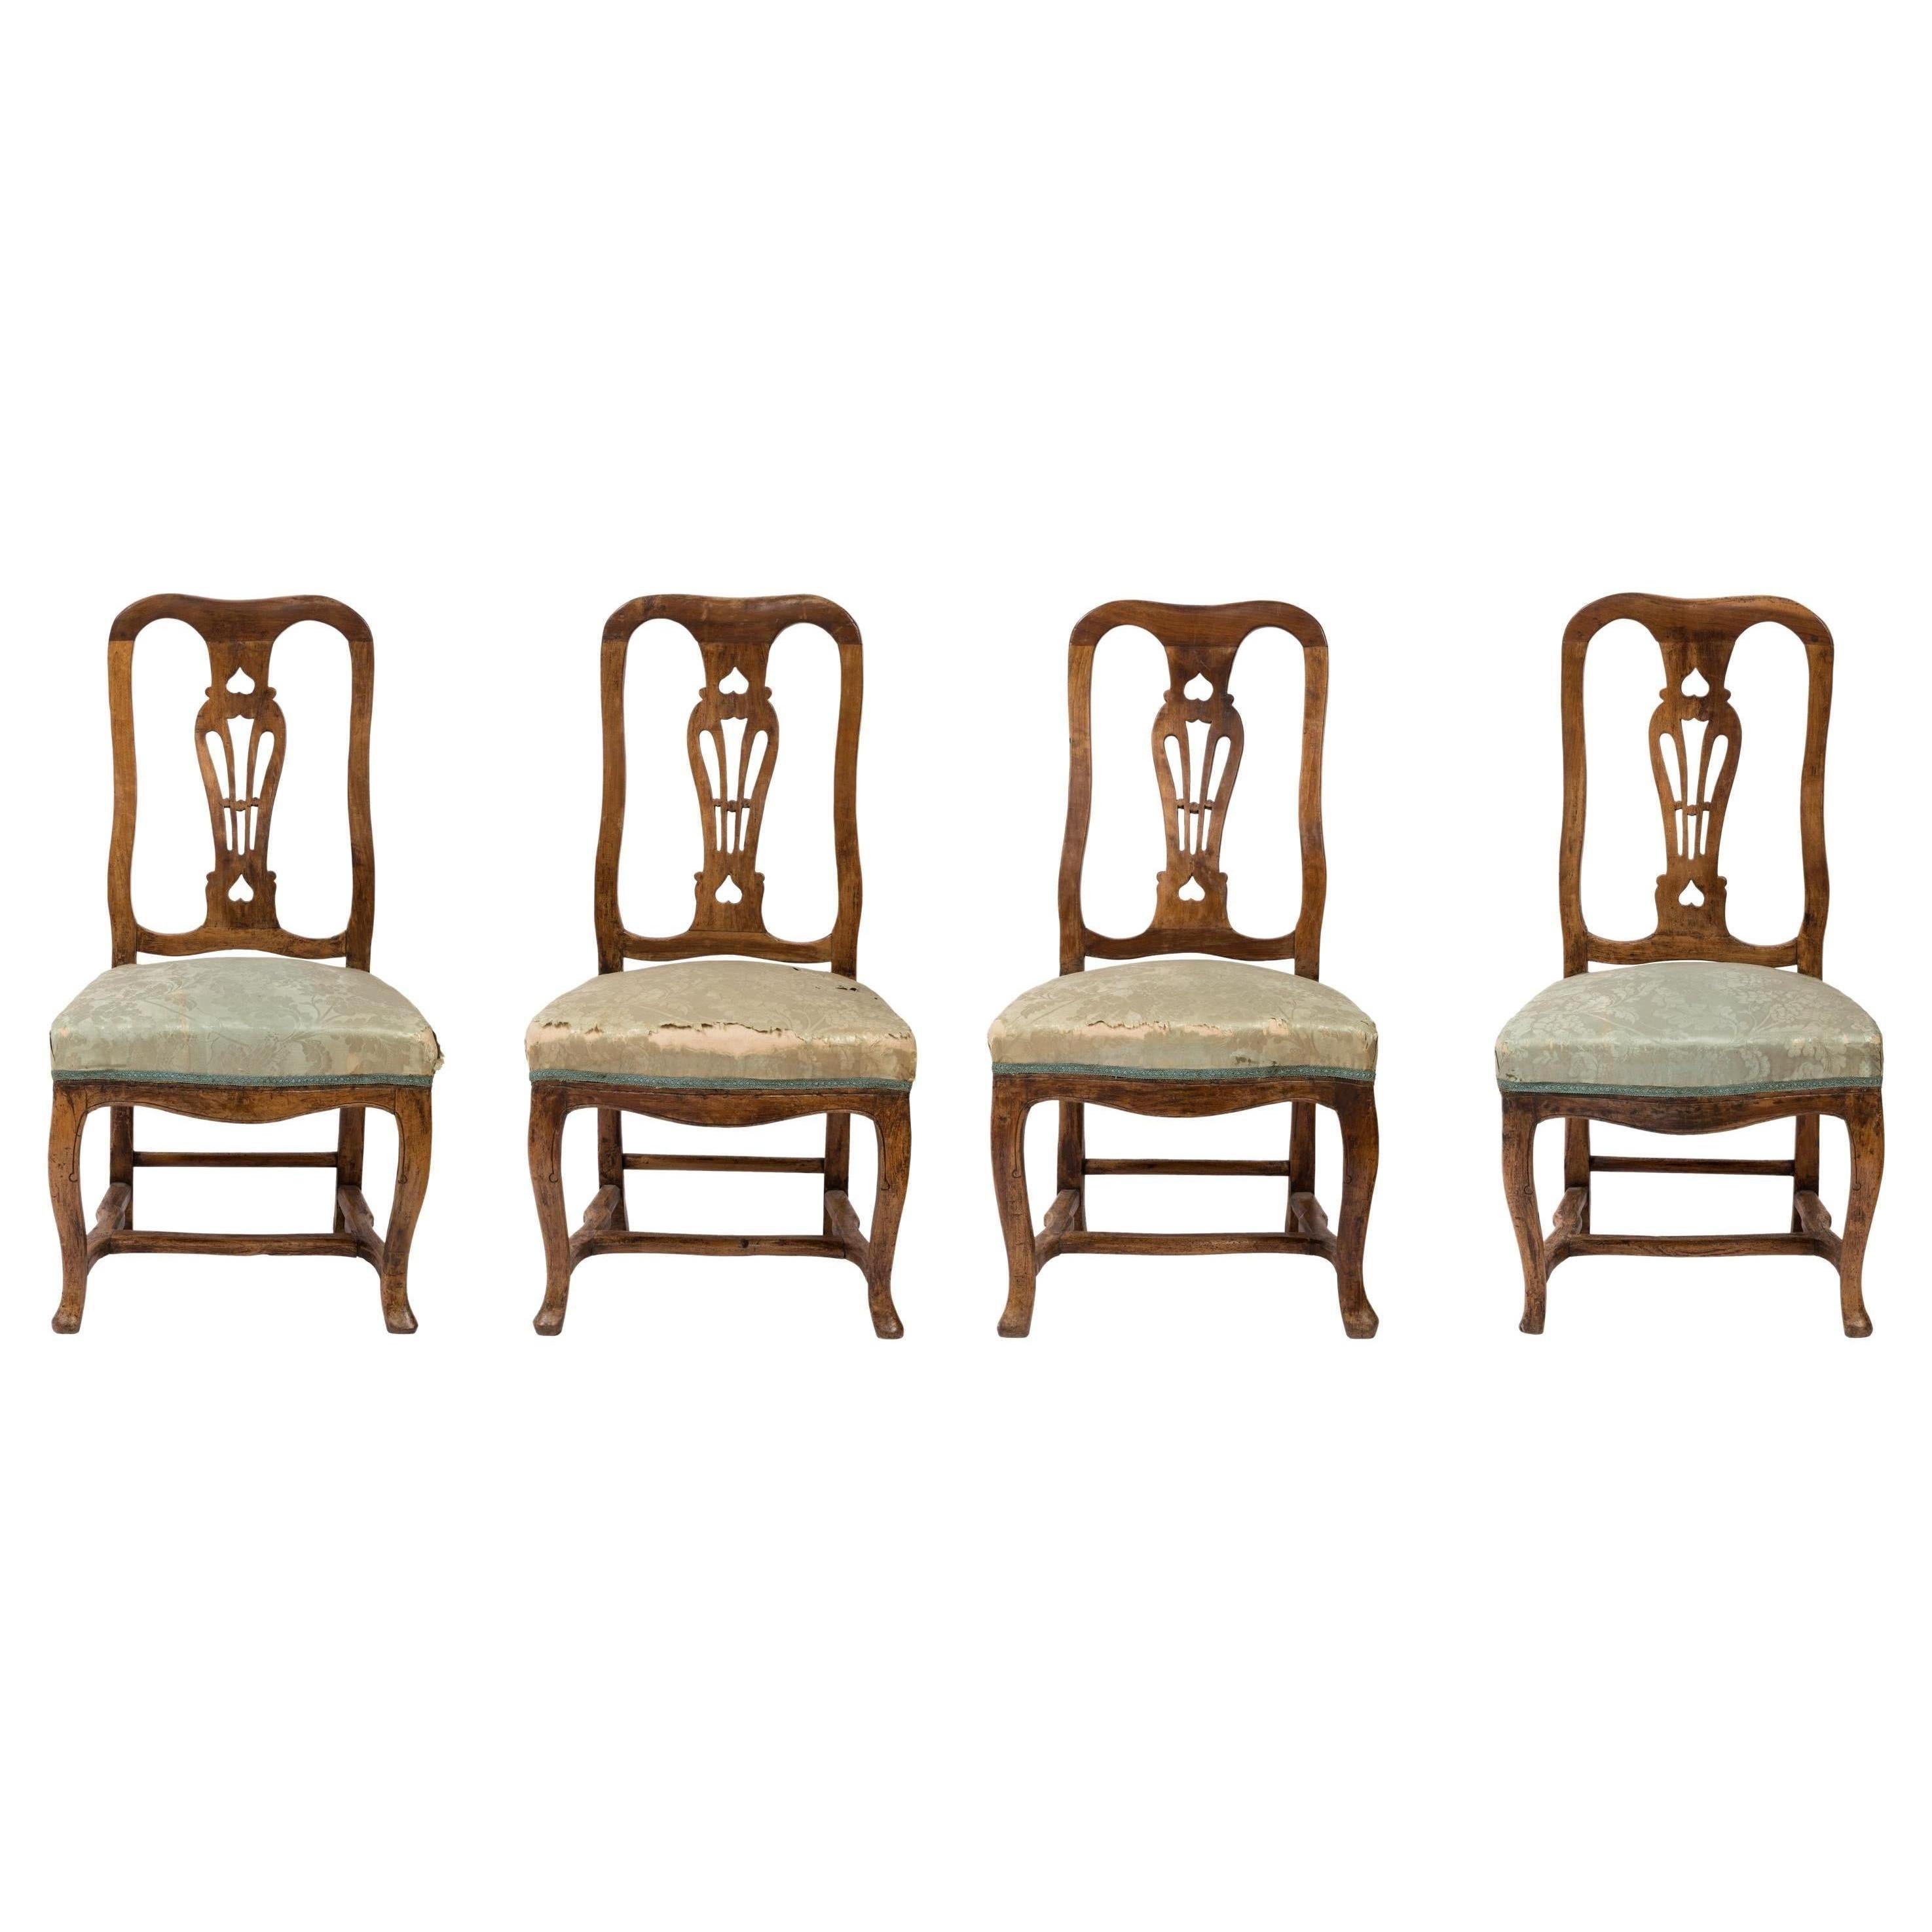 Set of 4 Antique Queen Anne Side Chairs, Hand-Carved Wood, Original Silk Fabric